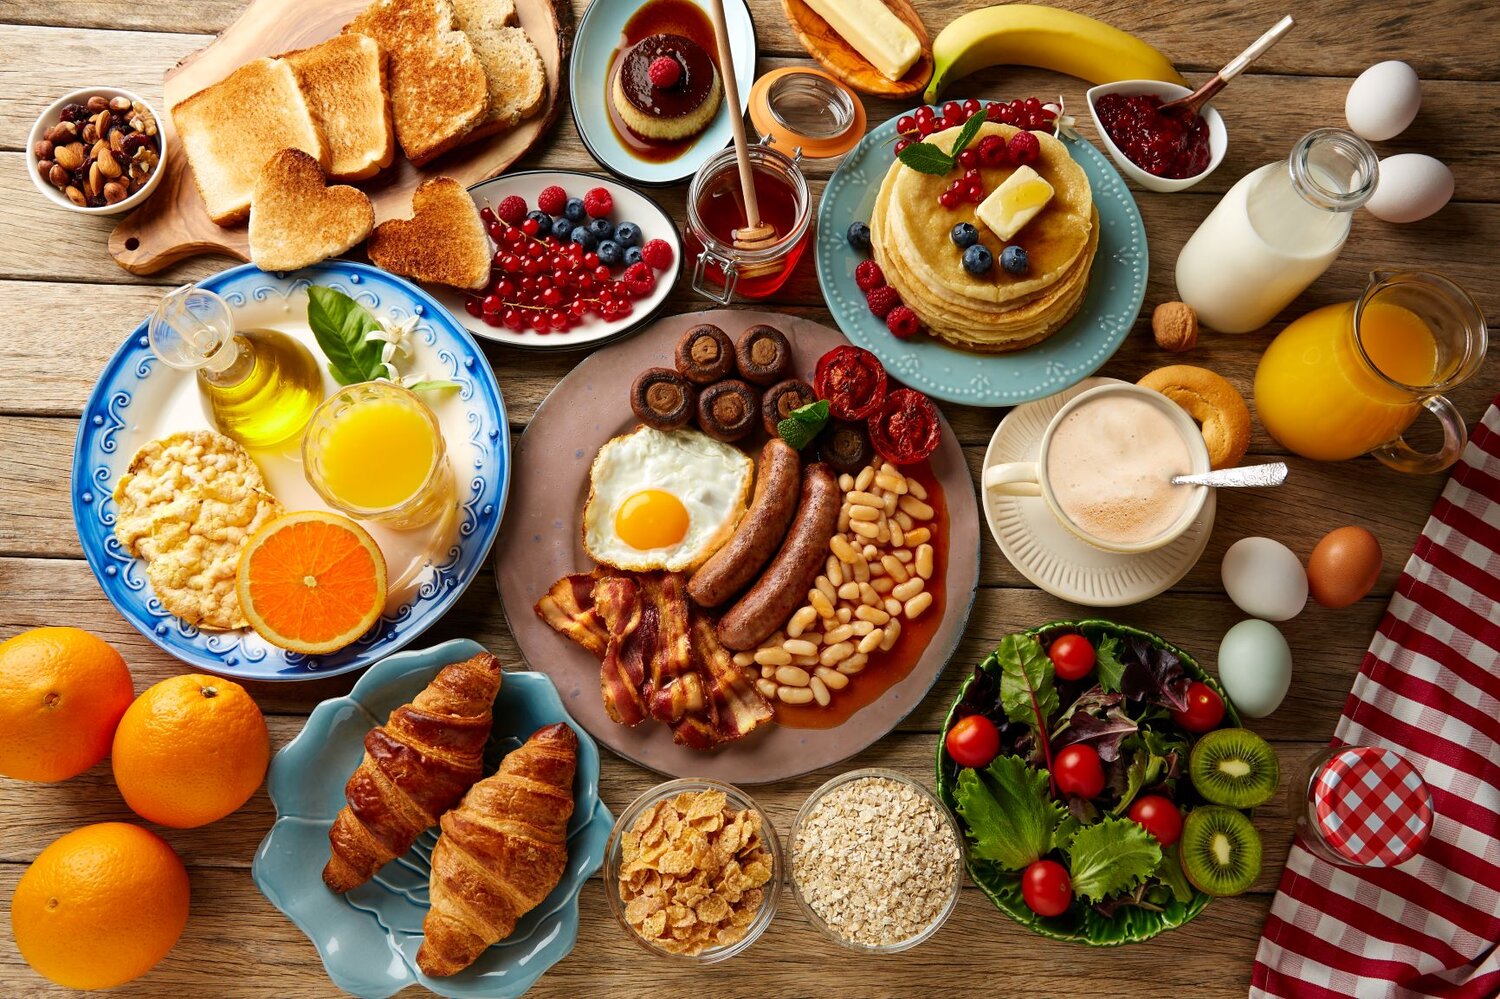 Could You Actually Go on a Vegan, Vegetarian or Pescatarian Diet? Breakfast Foods